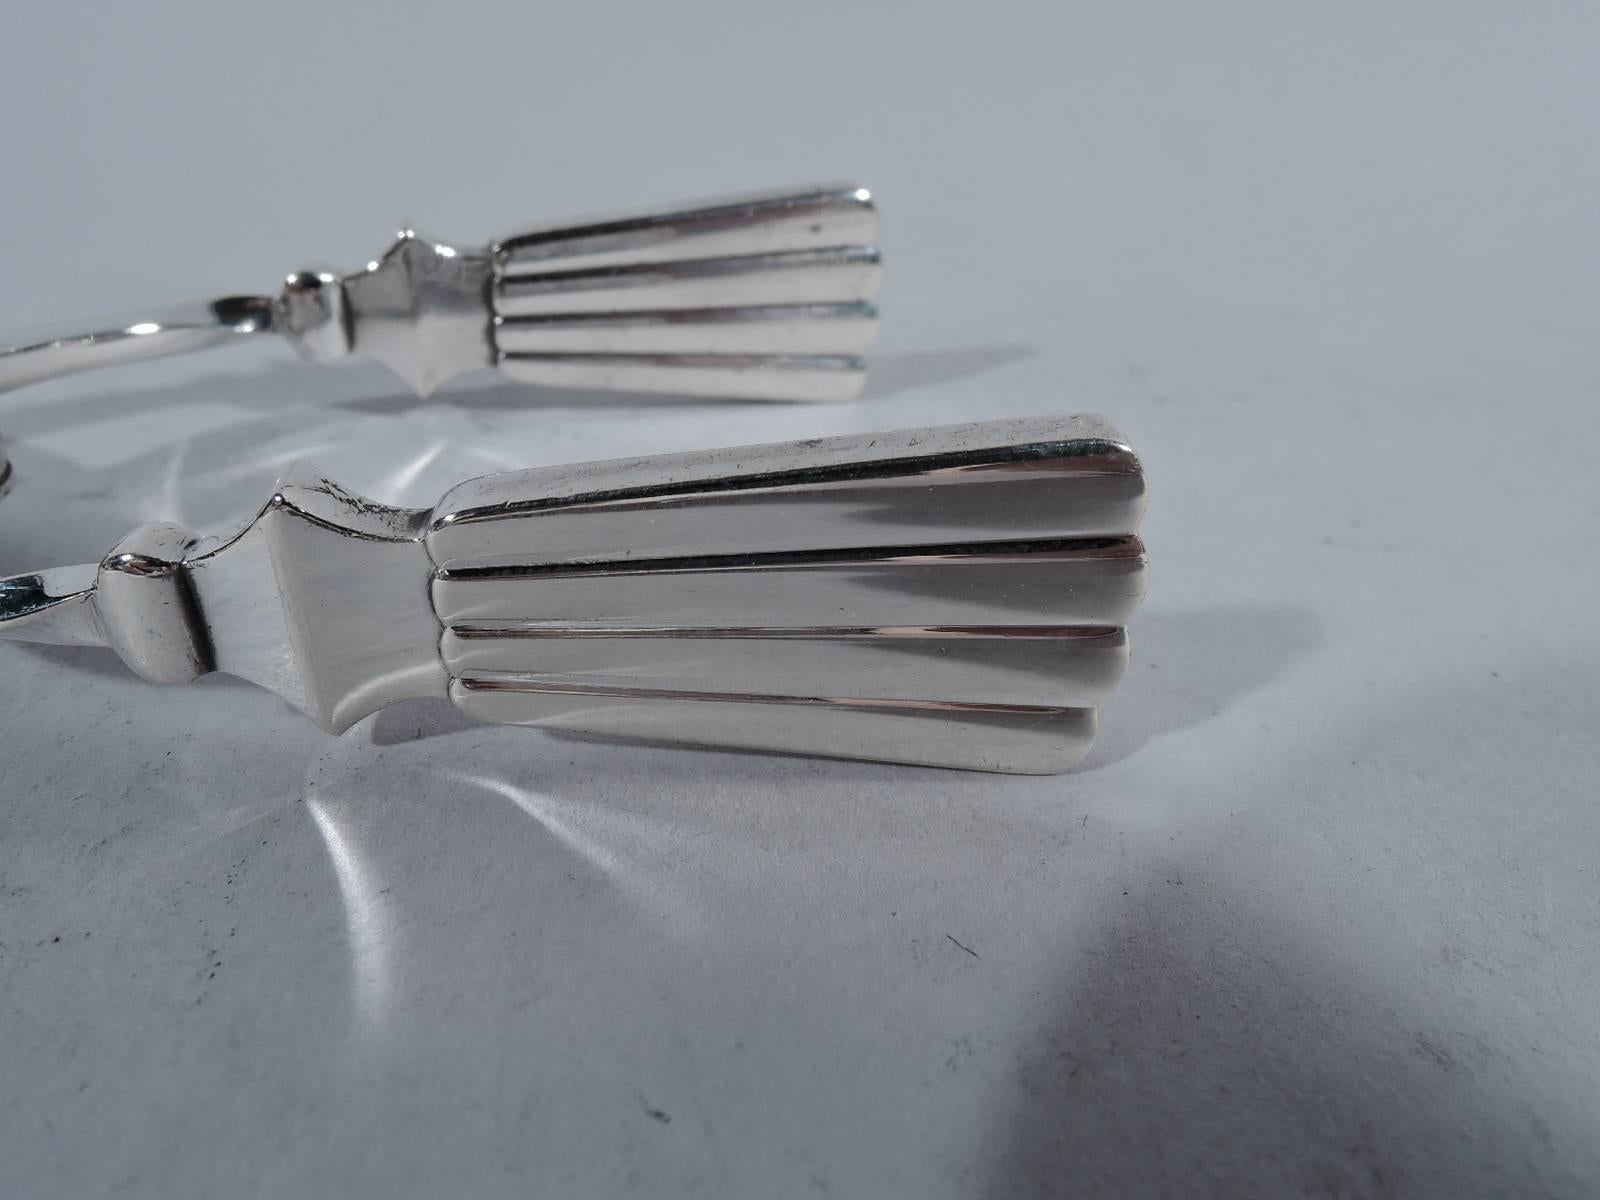 Pair of sterling silver ice tongs in Bernadotte pattern. Made by Georg Jensen in Copenhagen. Tapering linear terminals and leaf jaws. The pattern was first produced in 1939. Postwar hallmark. Weight: 2.3 troy ounces.